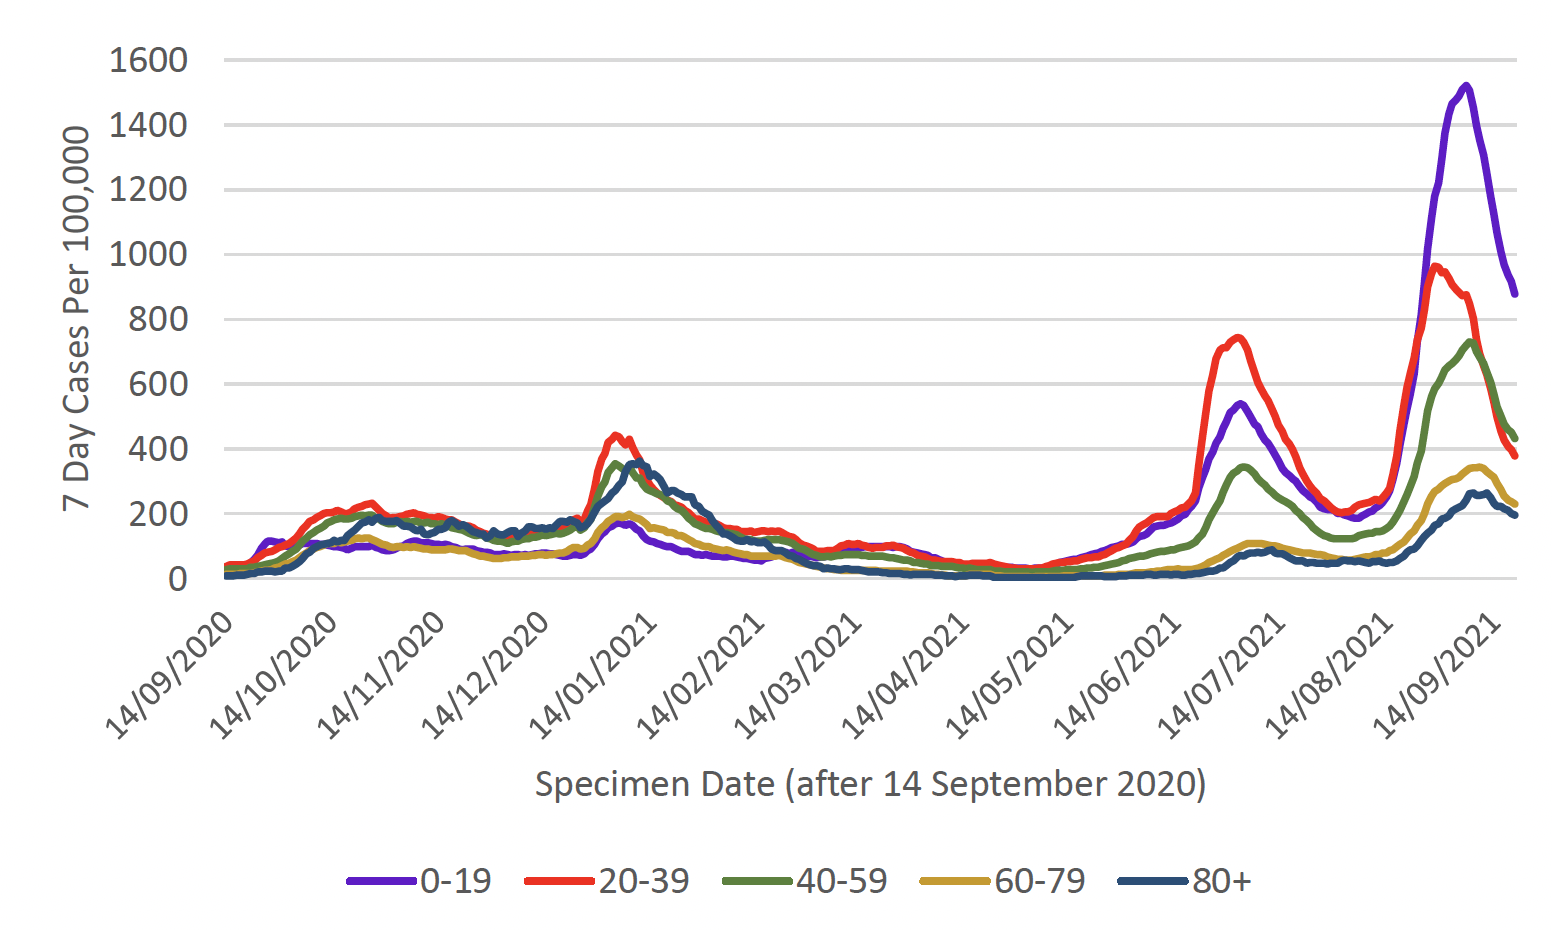 This line graph shows weekly cases per 100,000 people for five different age bands over time, from mid-September 2020. Each age band shows a similar trend with a peak in cases in January, with the 20 to 39 age band having the highest case rate, and the under 20 age band having the lowest case rate. Case rates reduced in all age groups from this peak and then started to increase again sharply from mid-May, reaching a peak at the beginning of July 2021. 7 day case rates per 100,000 population then started to decrease sharply followed by a sharp increase in cases in mid-August 2021. Case rates started to go down at the start of September for all age groups. 